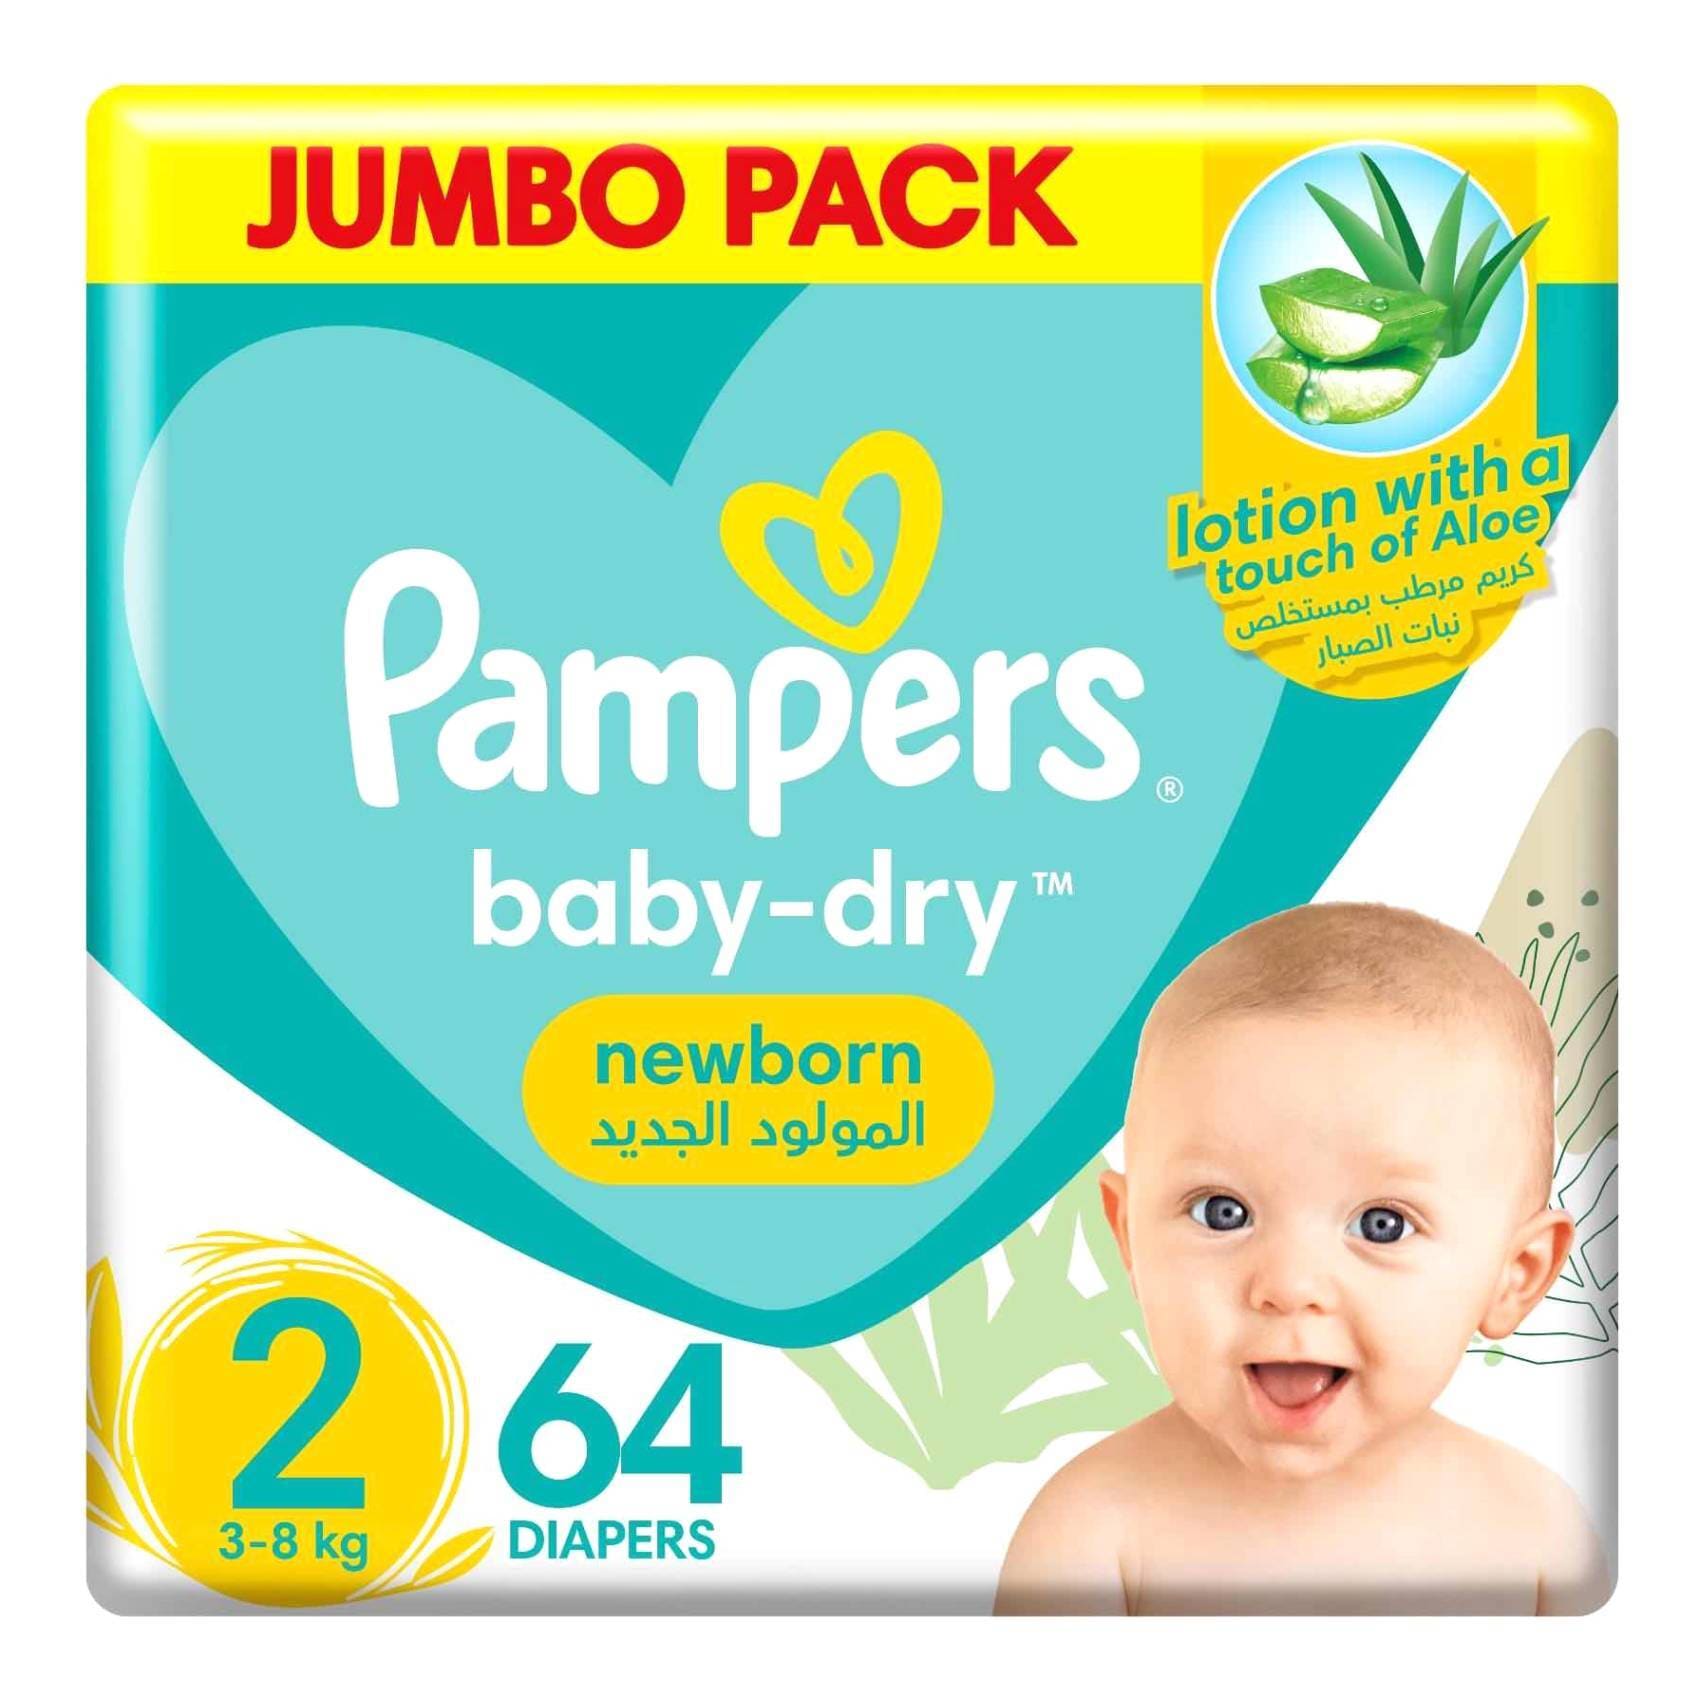 Pampers Baby-Dry Diapers, Size 2, Mini, 3-8Kg, Wetness Indicator, Wider Sides For Comfort, 23 Baby Diapers clube.zeros.eco